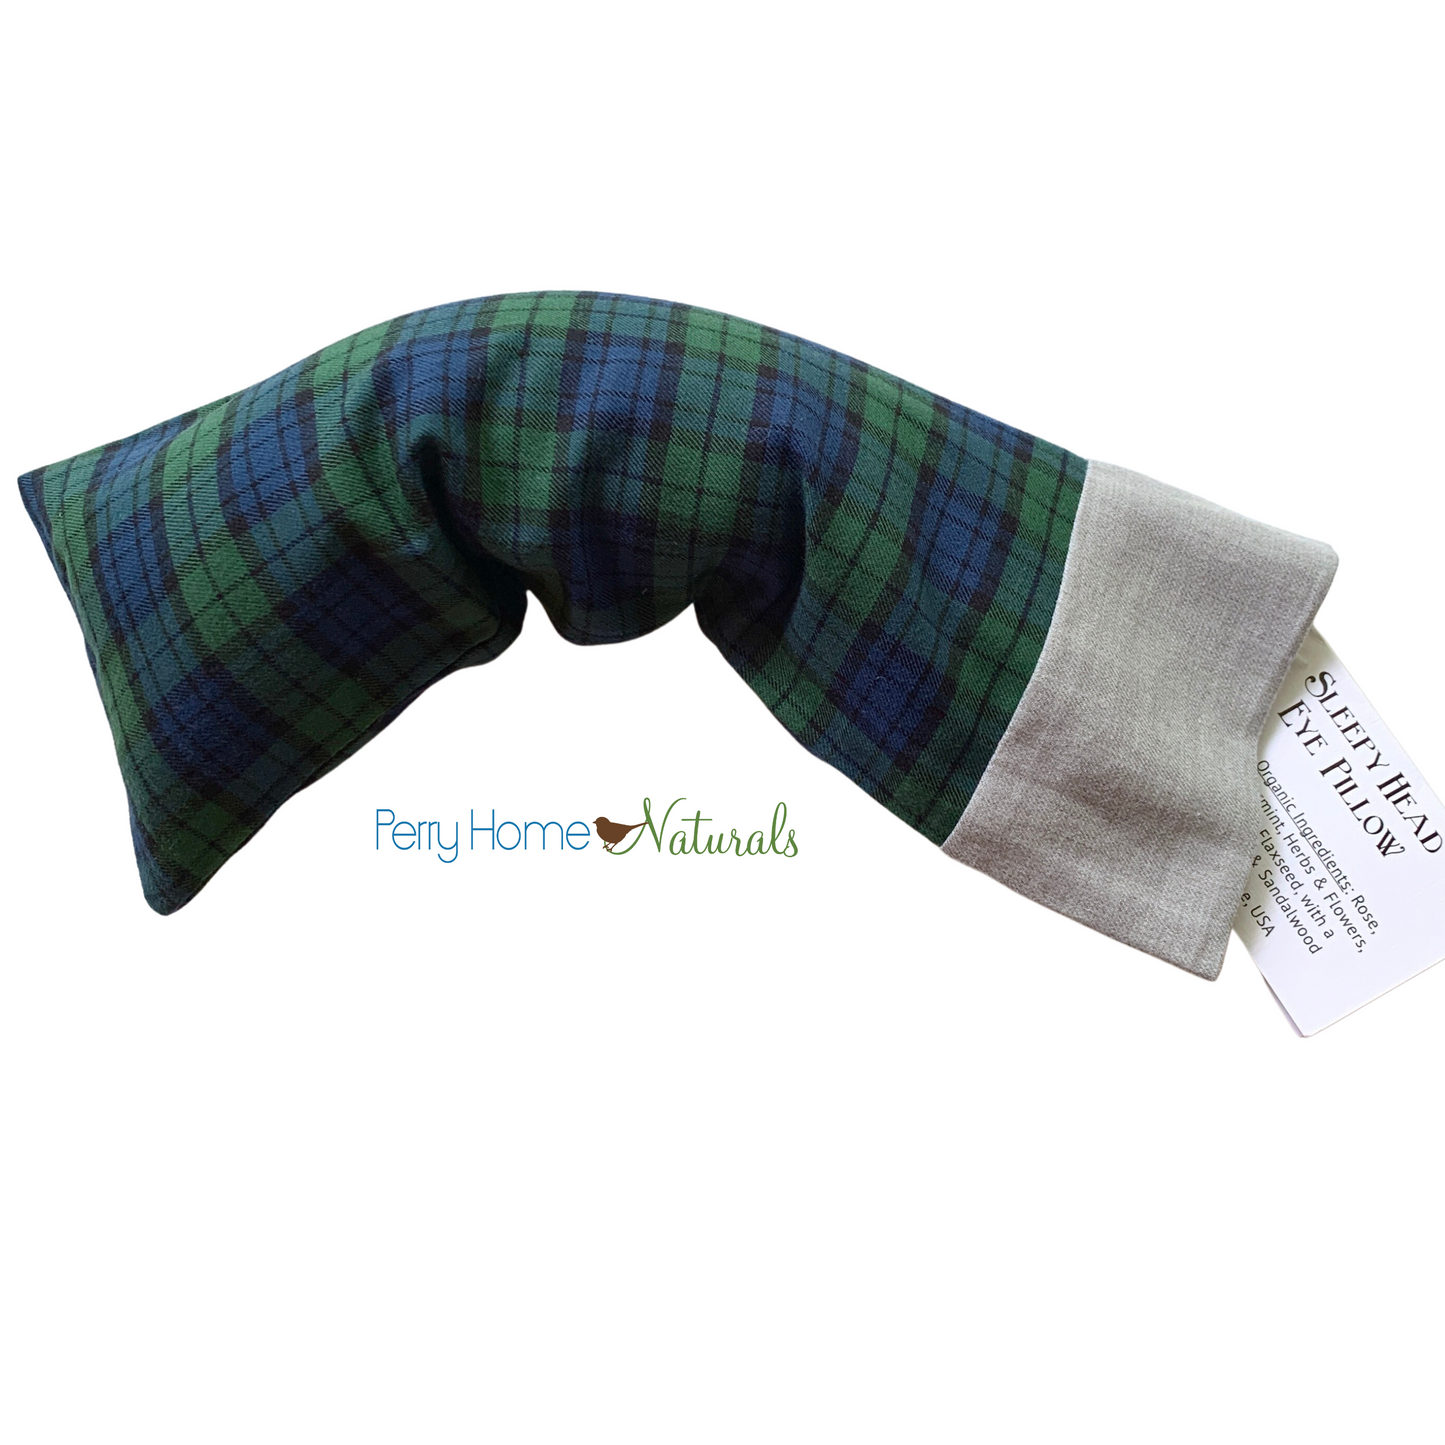 Aromatherapy Eye Pillow with Choice of Blend - Organic Green Plaid with Grey Trim